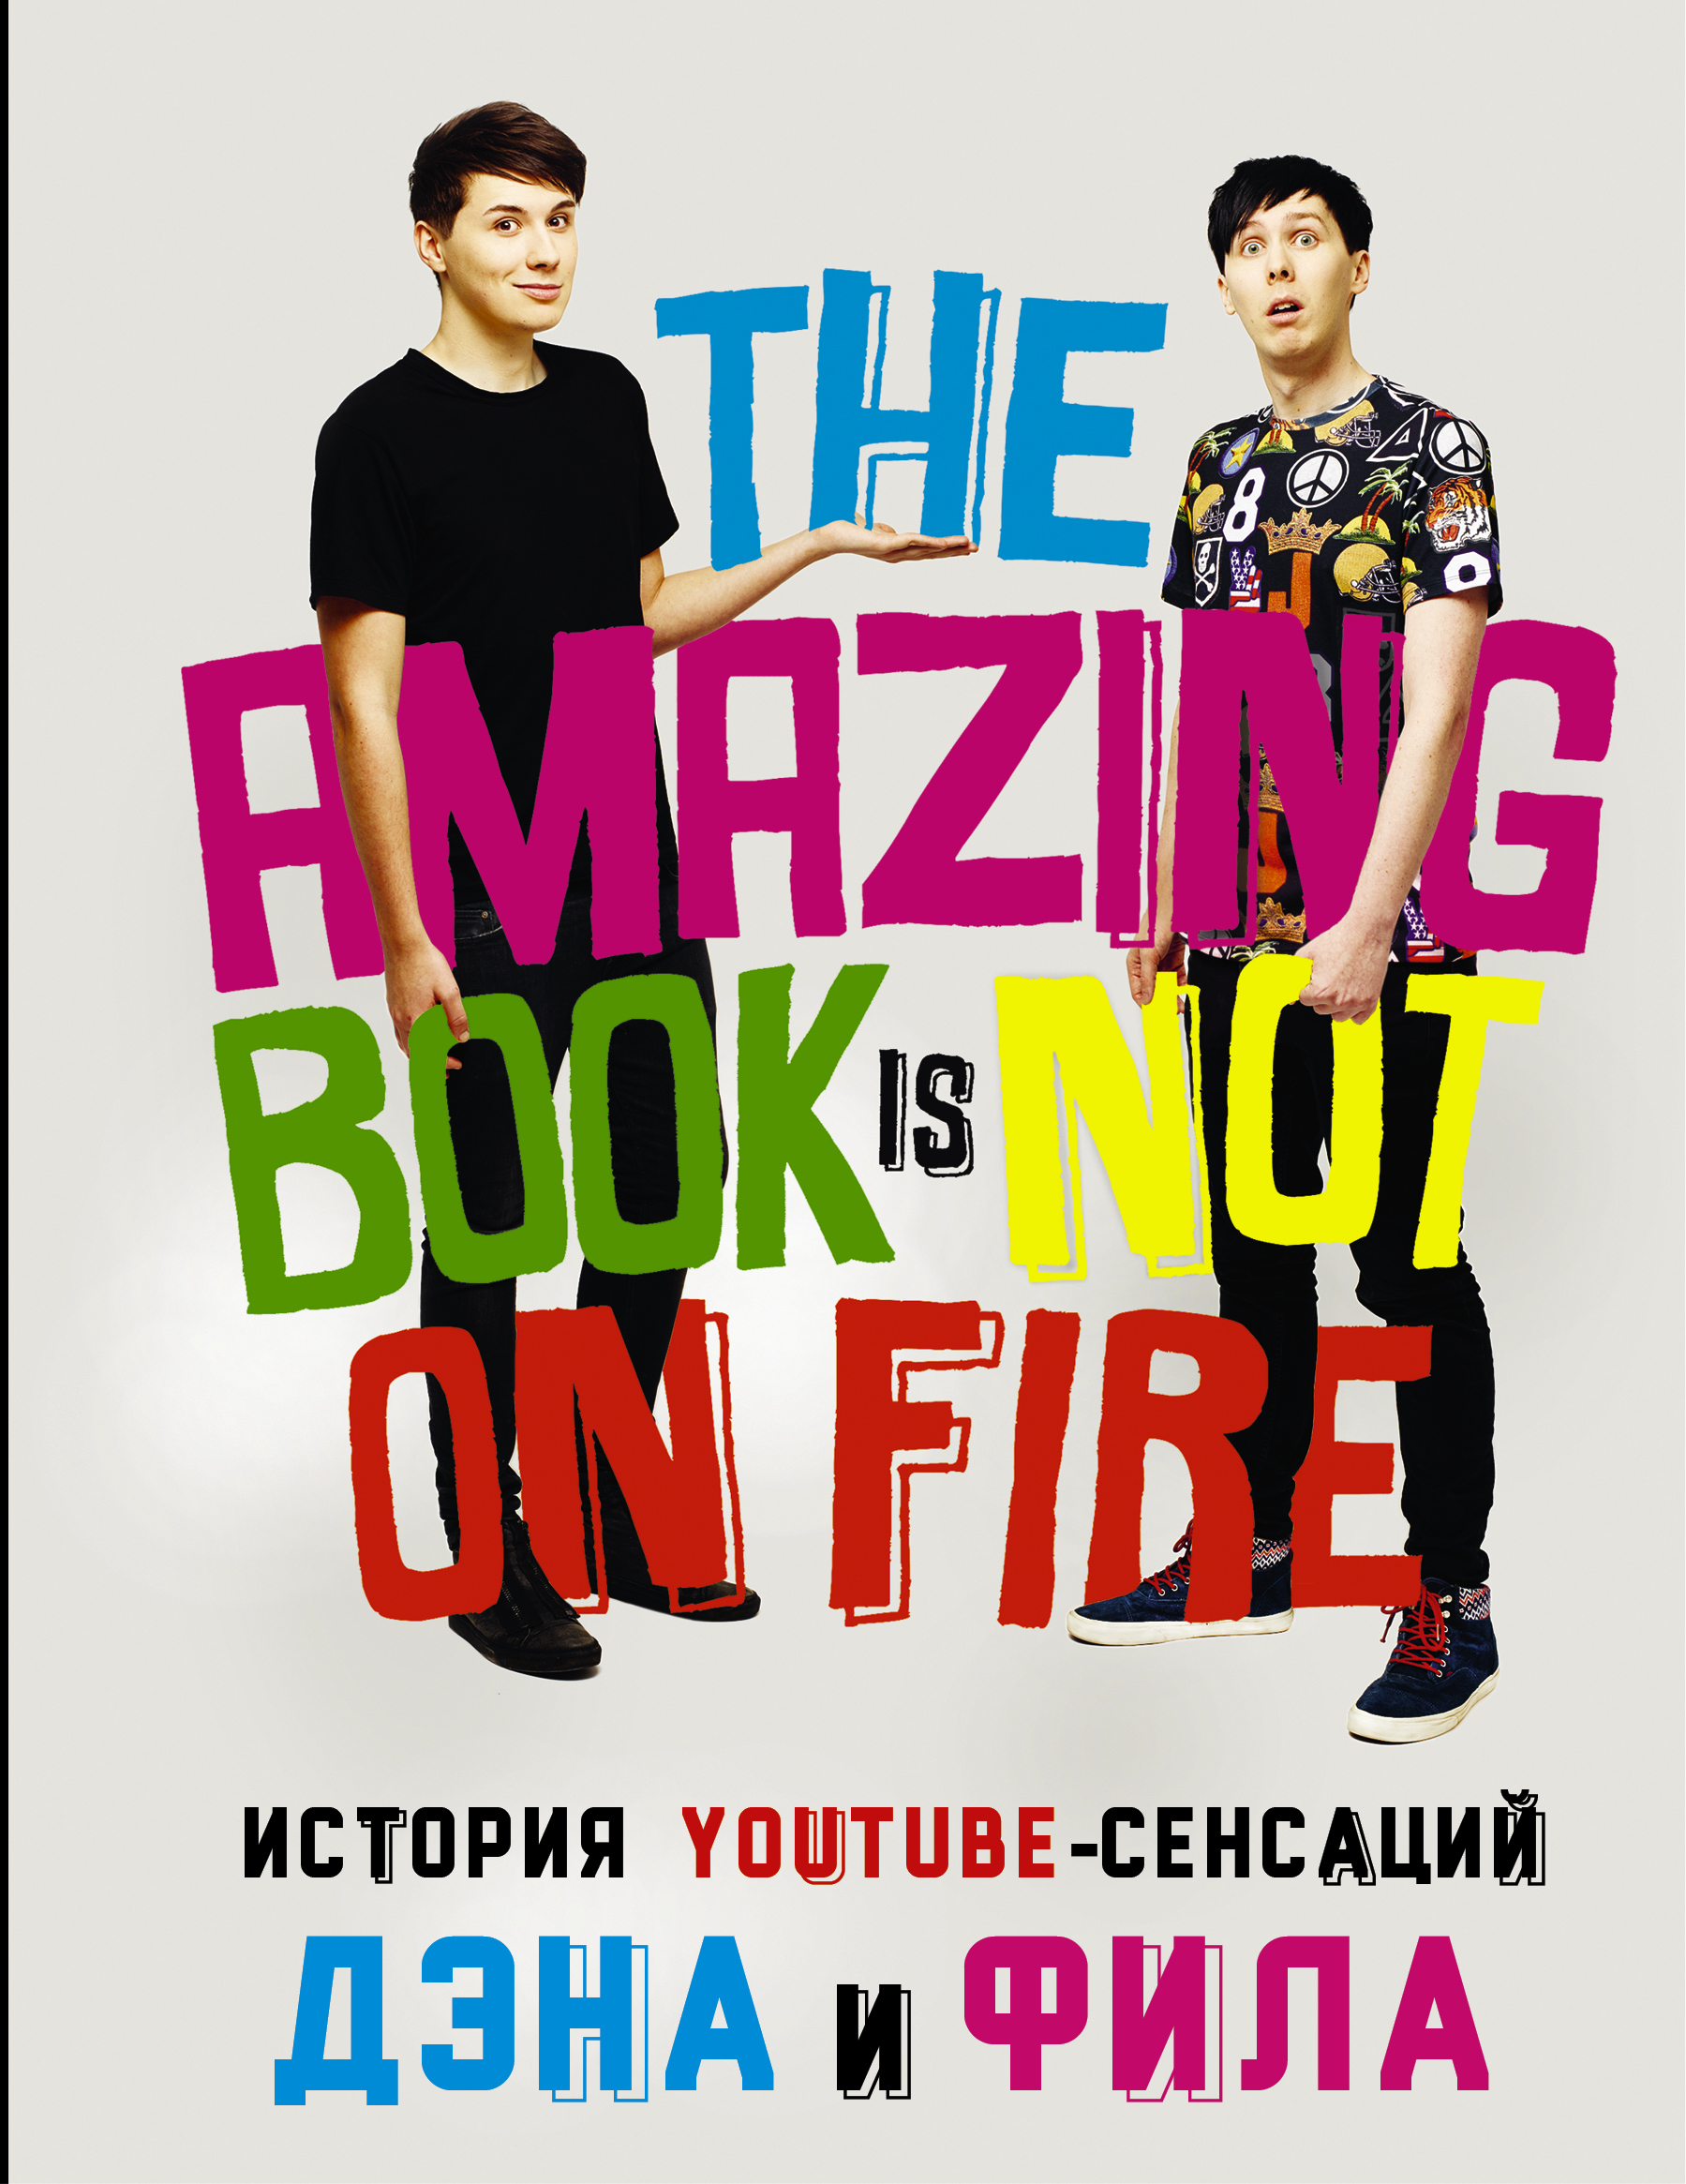  YouTube-   . The Amazing Book Is Not on Fire